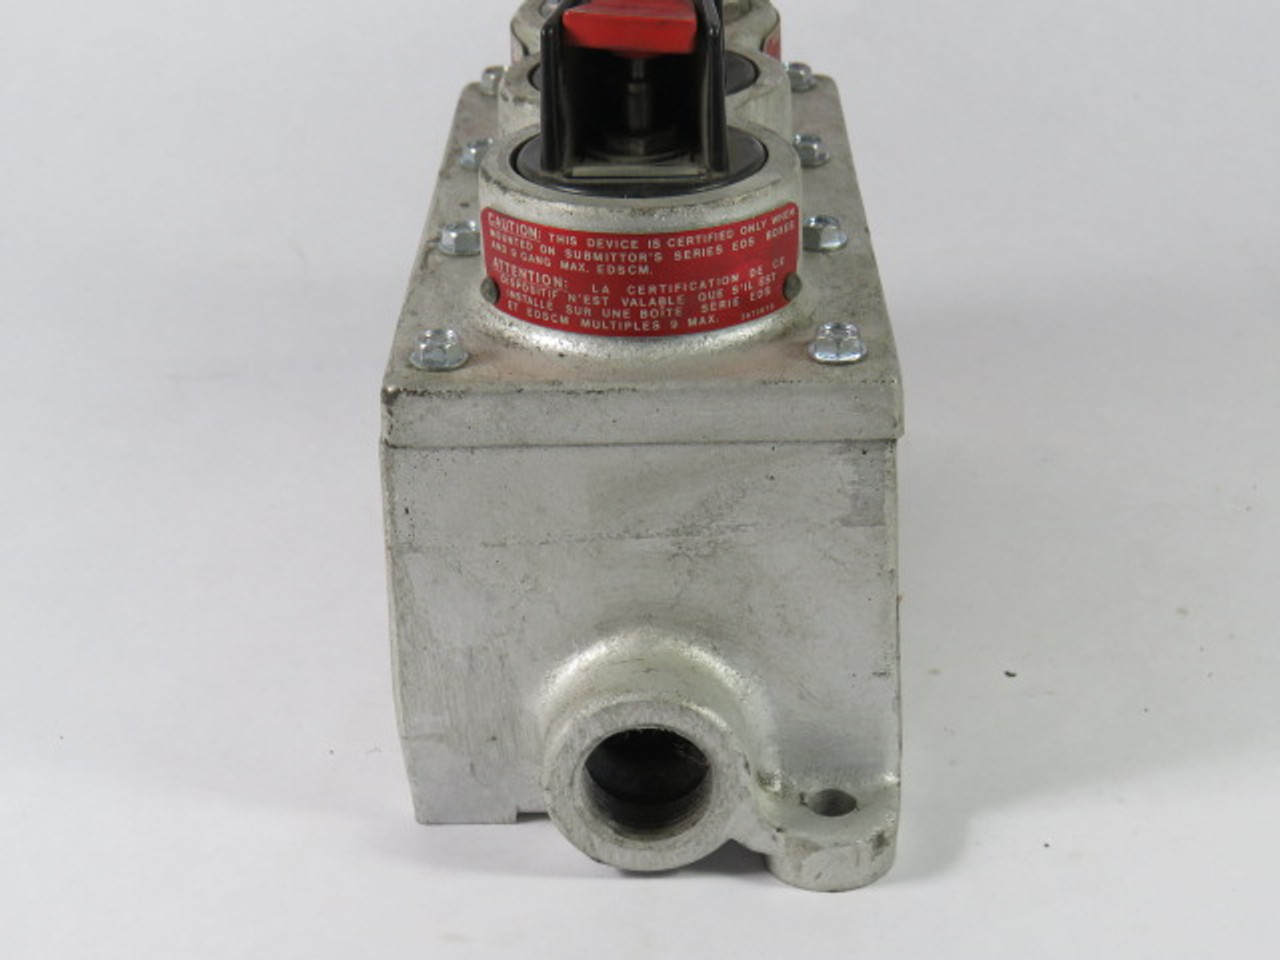 Crouse-Hinds DS-514-J Receptacle Box W/ Push Button Start/Stop 120V 6W USED